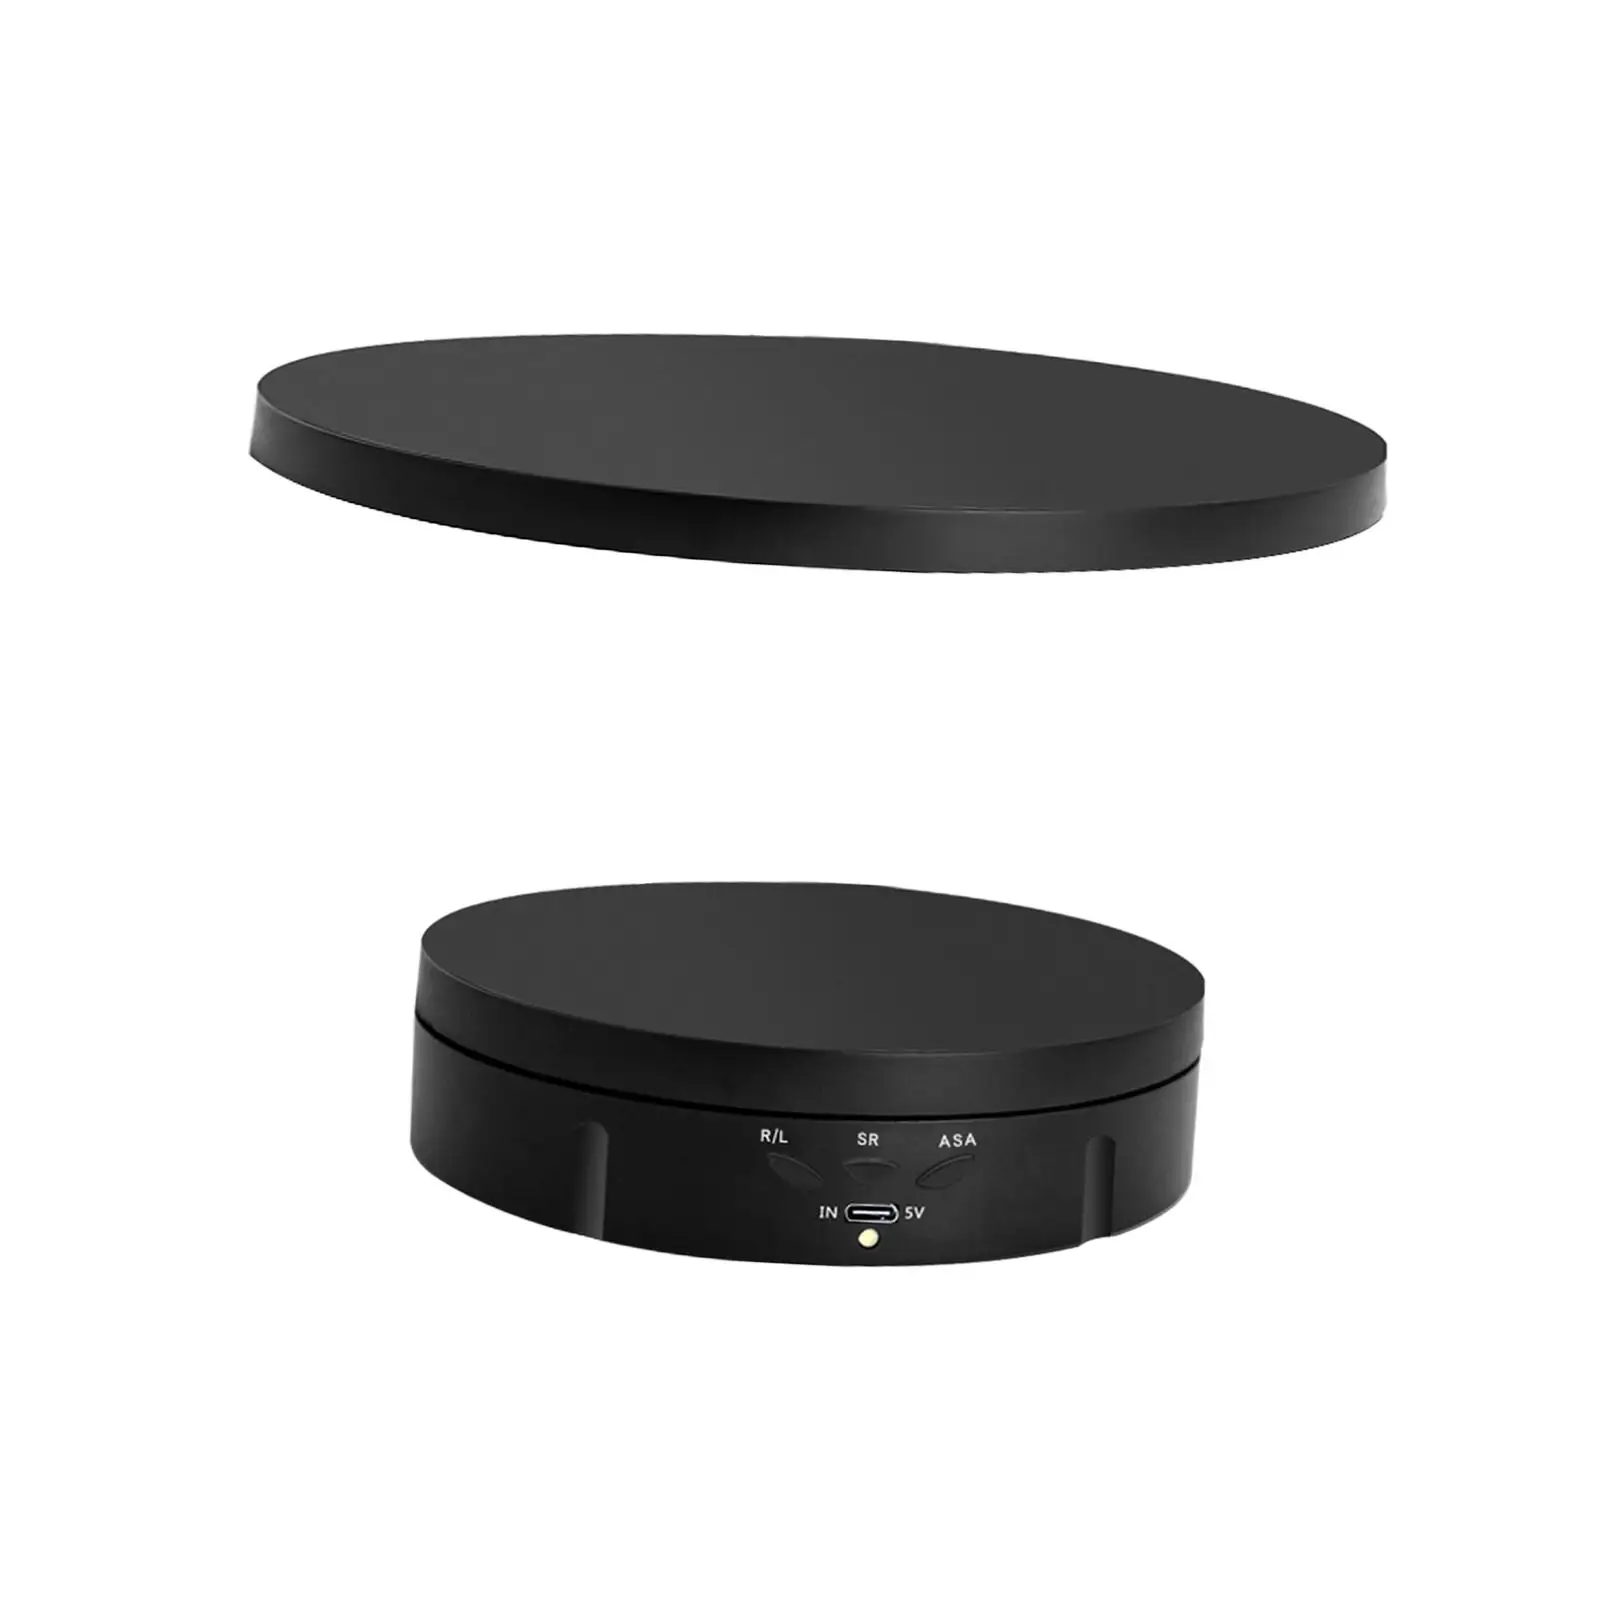 360 Degree Motorized Turntable Display Stand Display Turner Low Noise Electric Turntable for Model Product Display Jewelry Cake